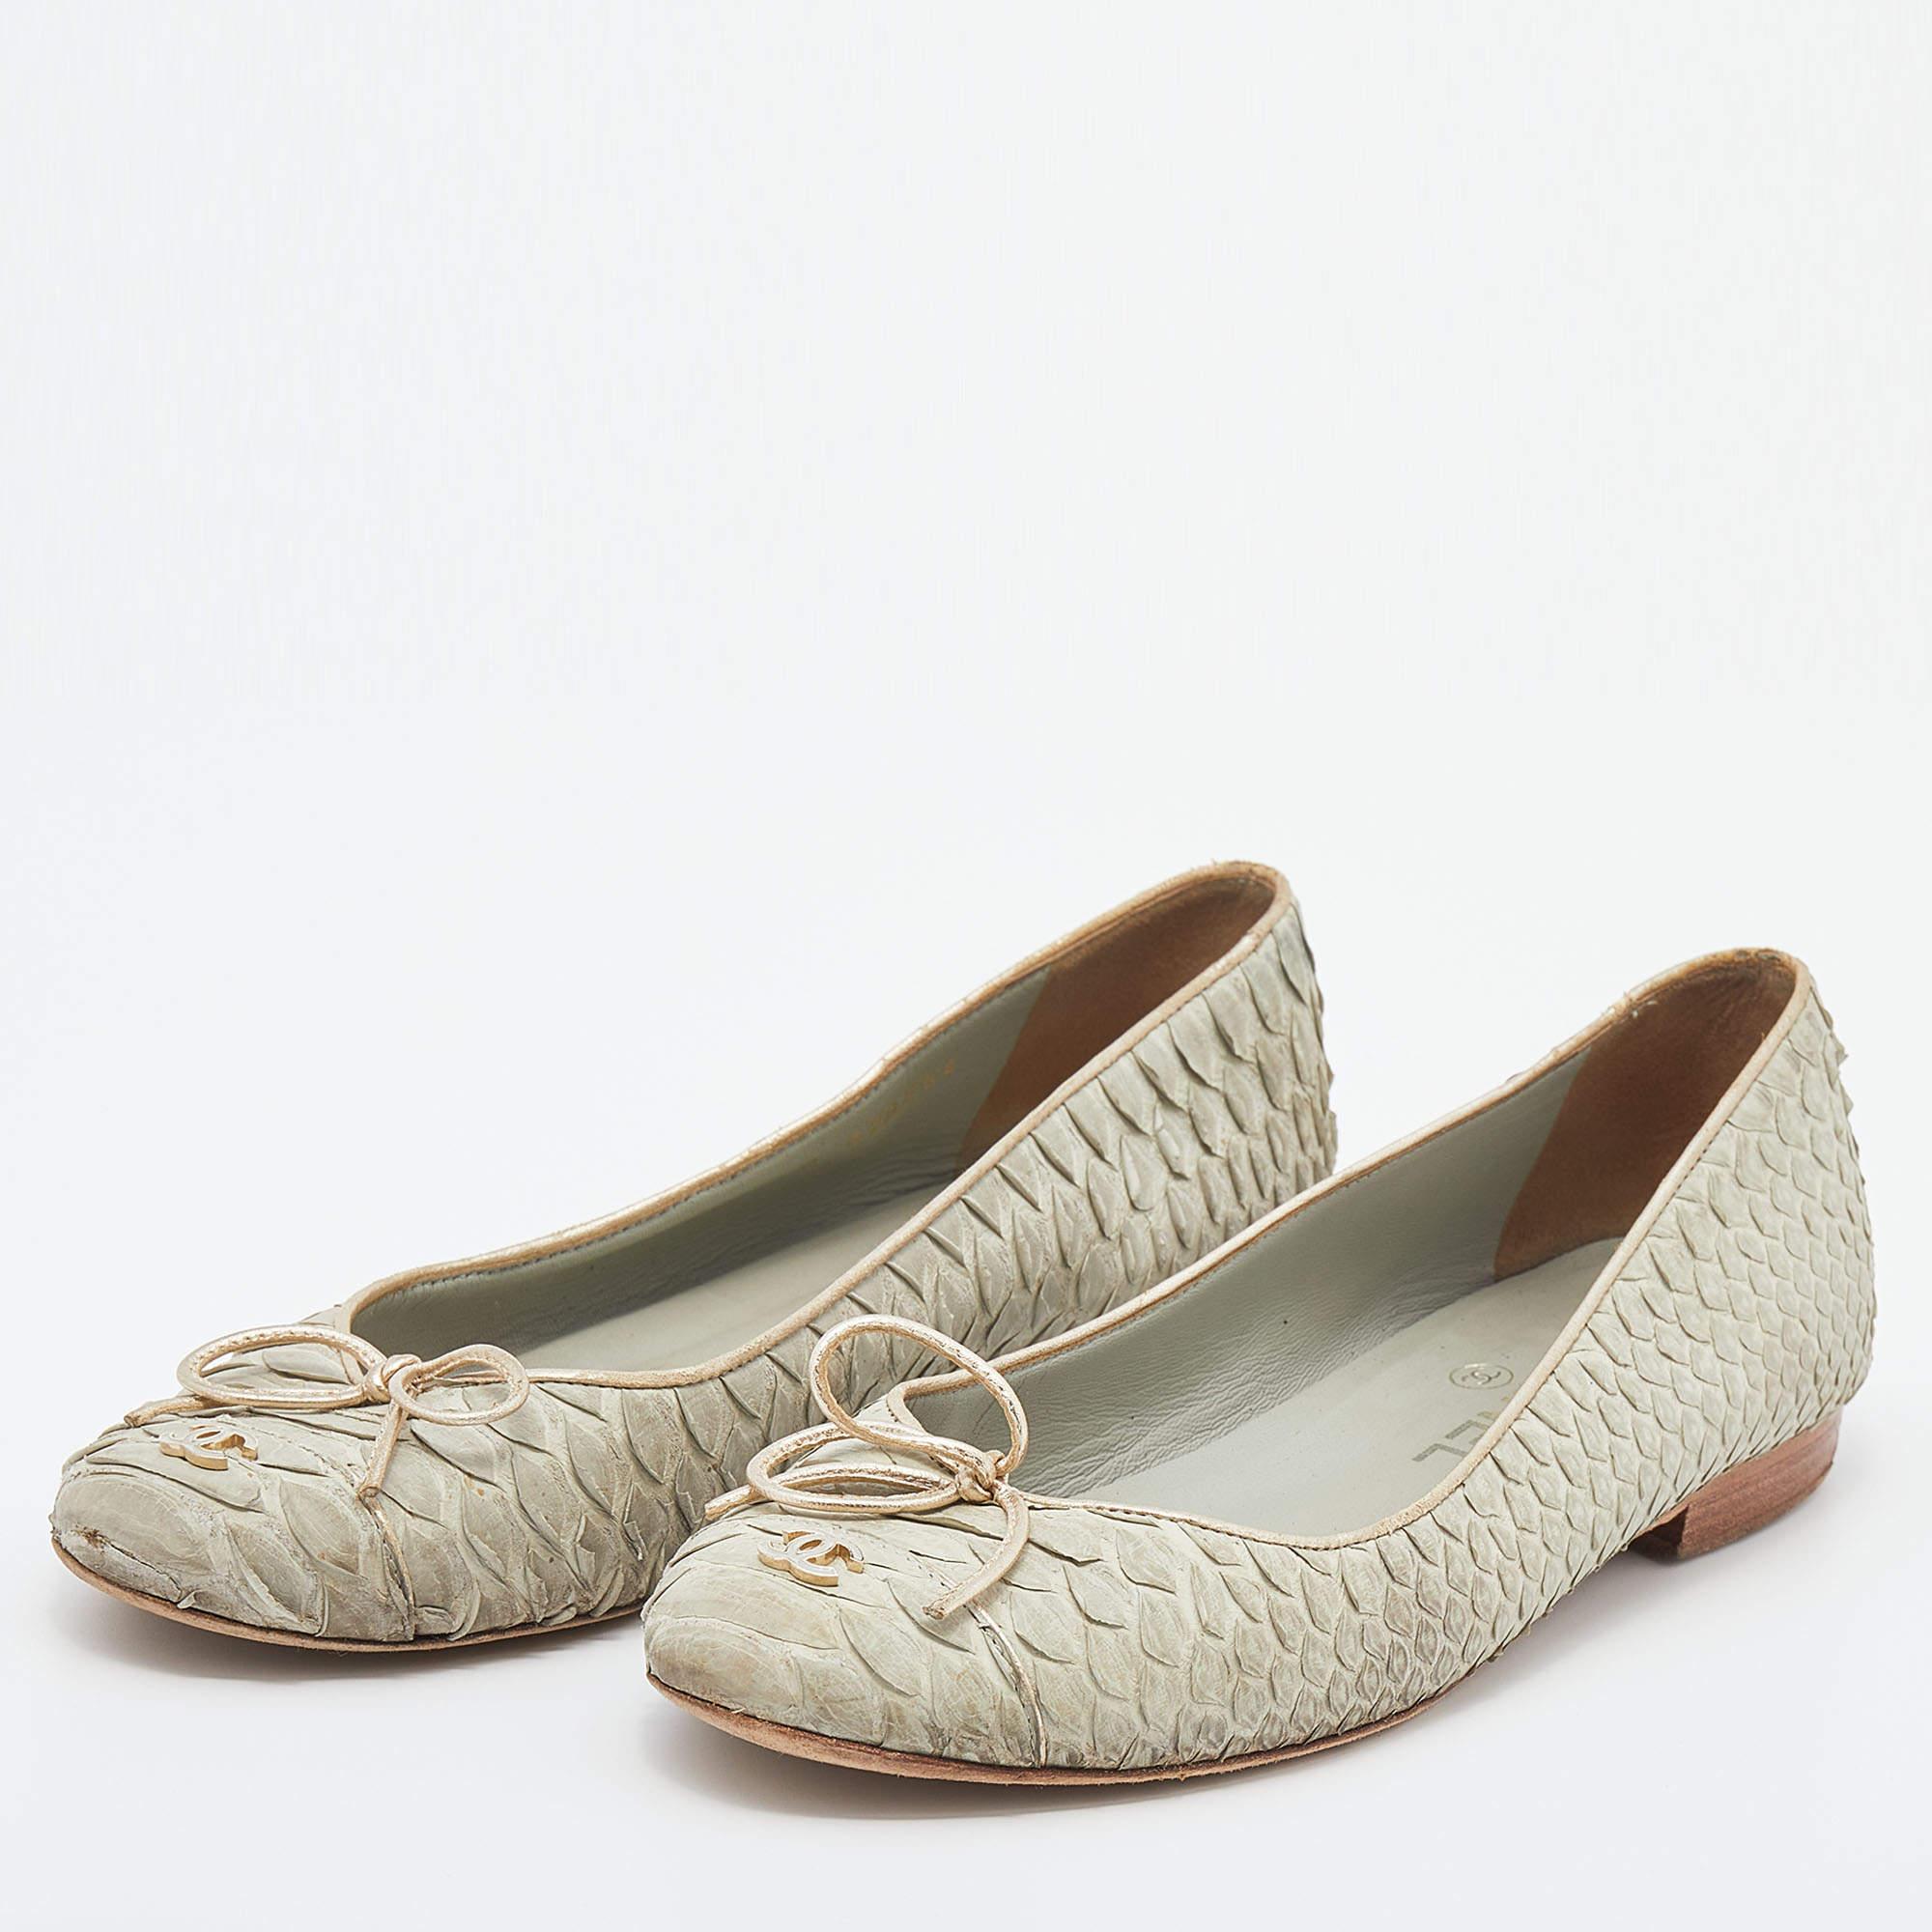 A common sight in the closets of fashionistas is a pair of Chanel ballet flats. They are perfect to wear on busy days and just chic enough to assist one's style. These flats are crafted from pale green python leather and feature the iconic CC logo